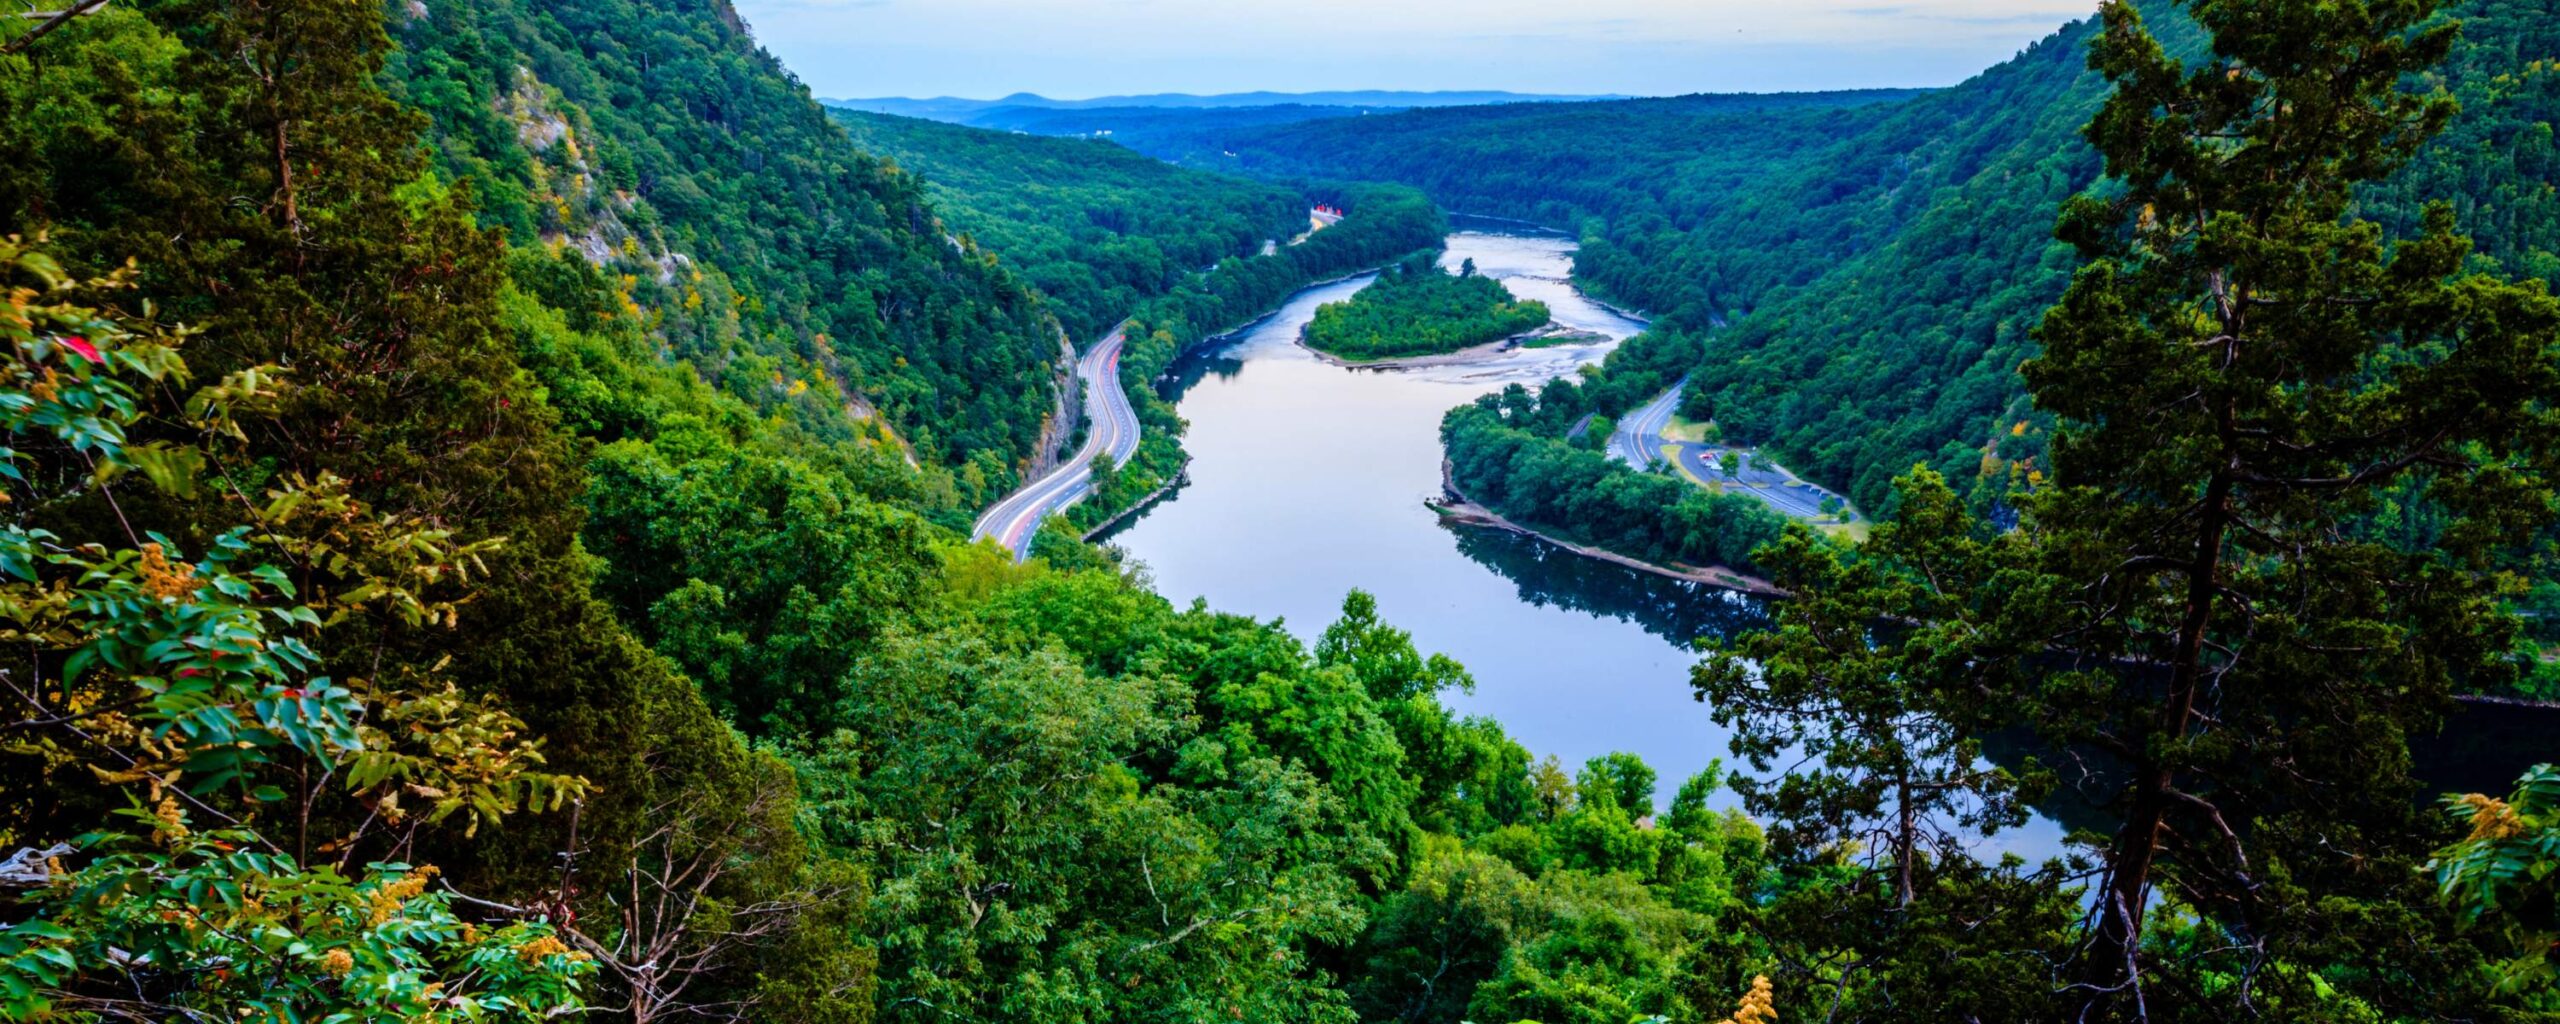 6 of the Best Hikes in the Delaware Water Gap